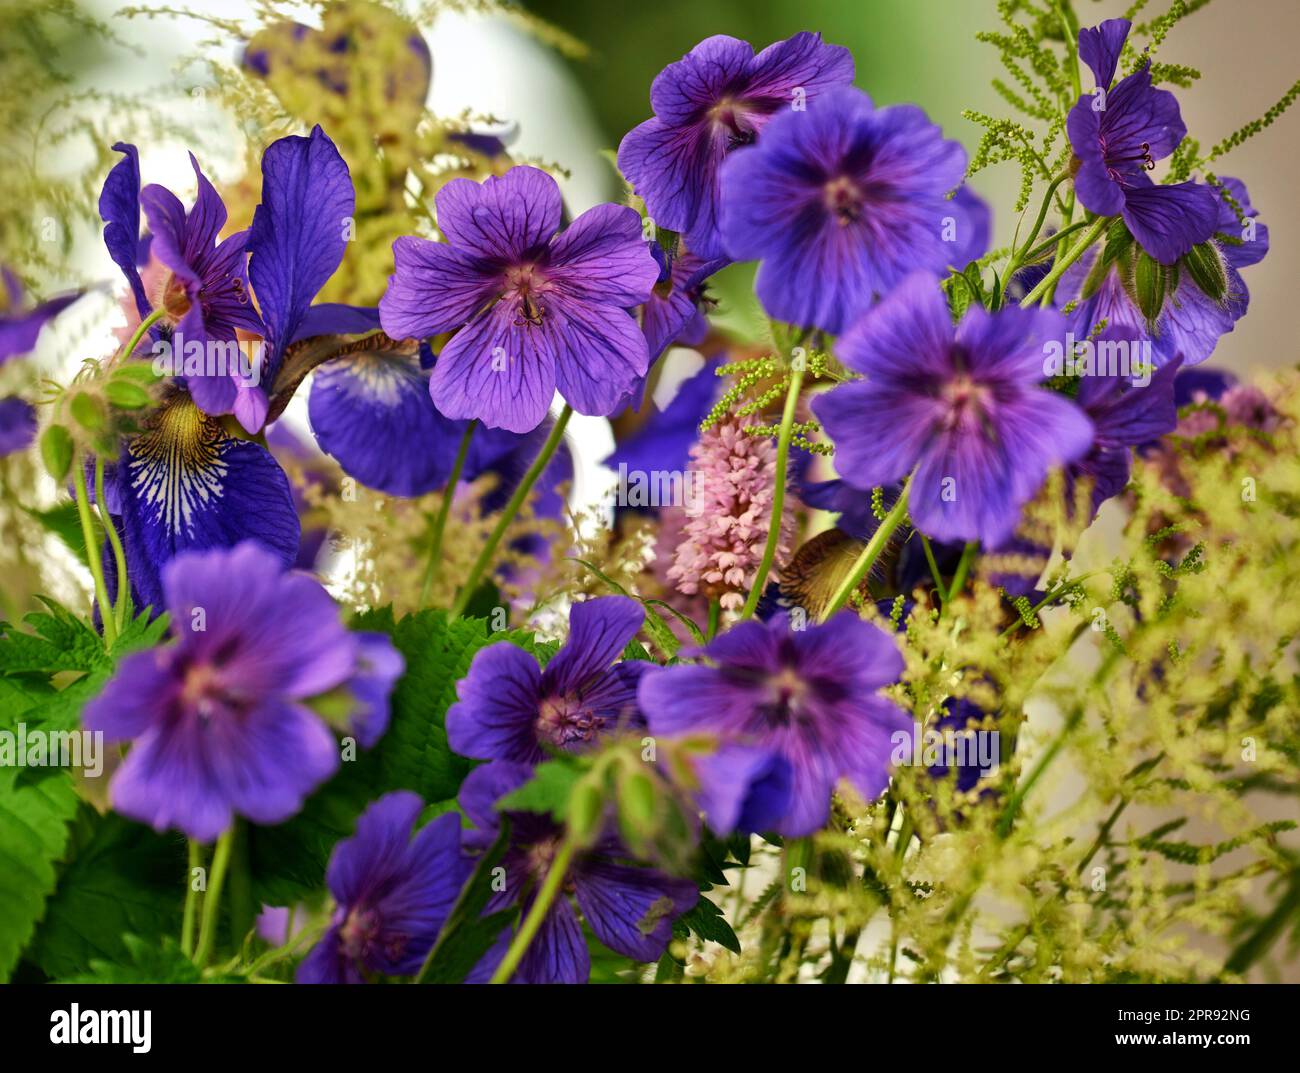 Closeup of blue cranesbill flowers with exposed stamen for pollination access in remote field, meadow or home garden. Macro texture detail of geranium plant growing, flowering or blooming in backyard Stock Photo